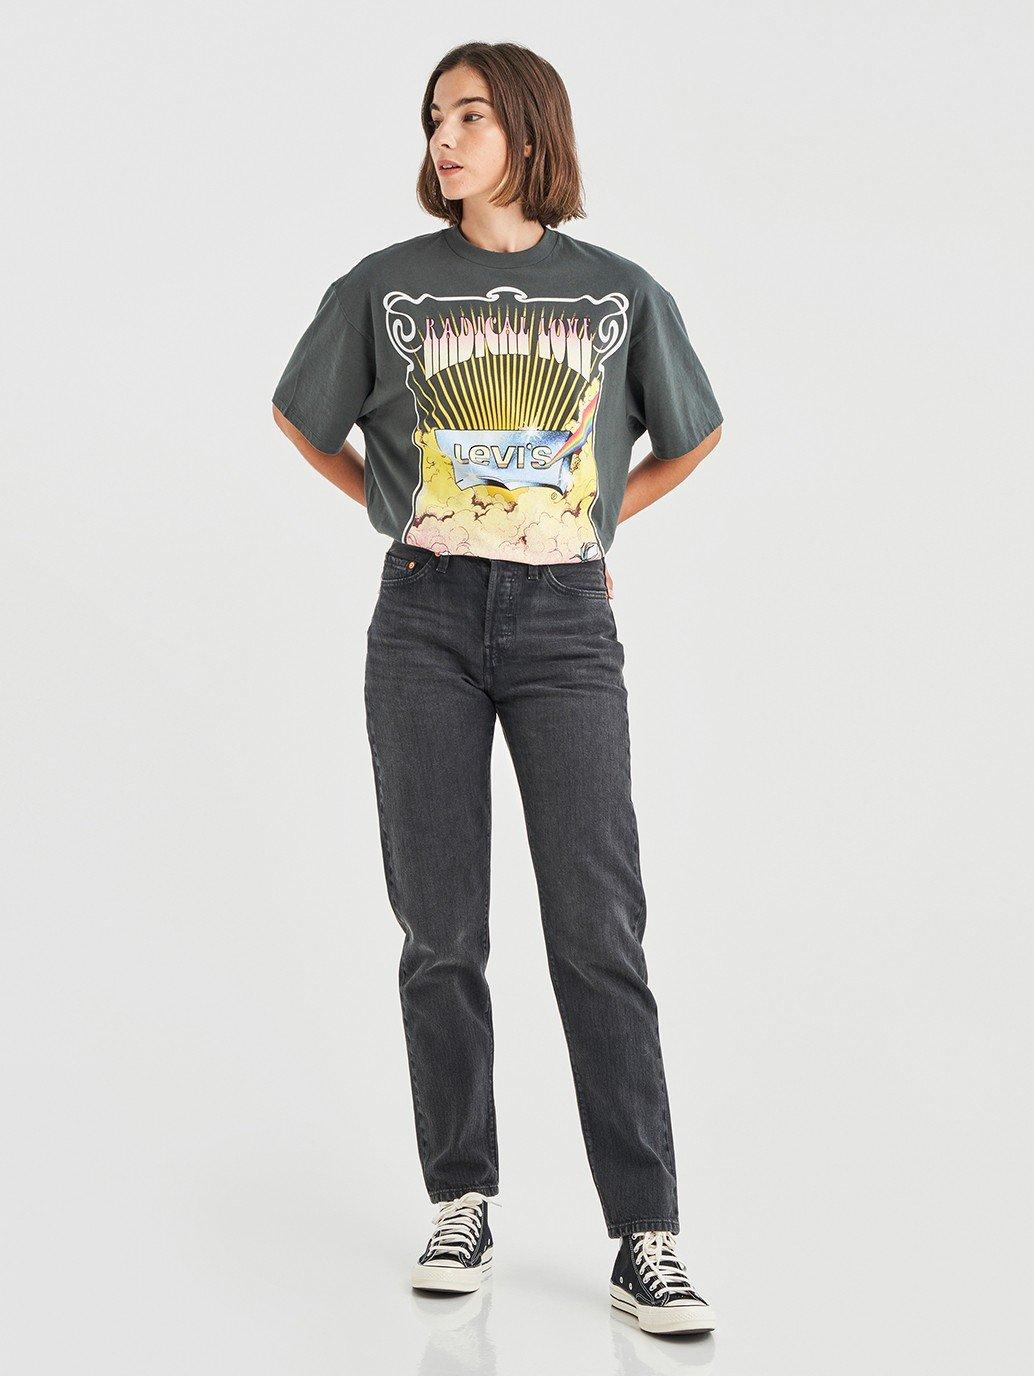 levis malaysia womens 501 81 jeans A46990005 13 Details